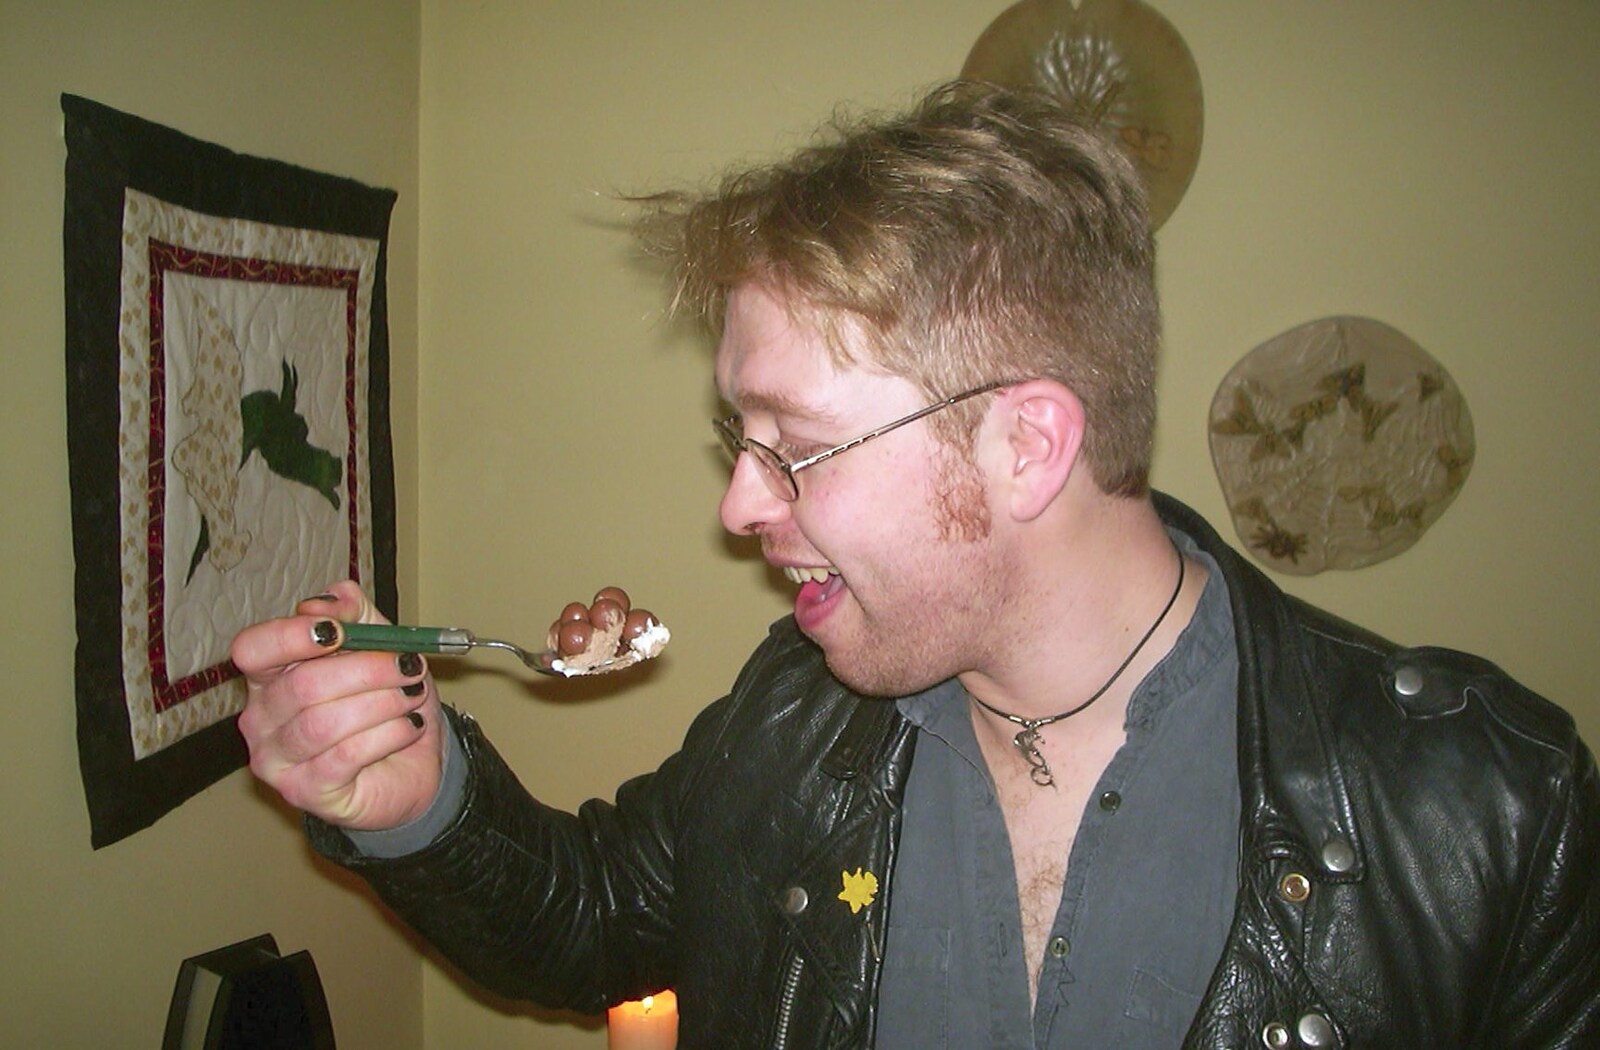 Marc eats something made from Maltesers from Anne's Gothic Night, Thorndon - 25th January 2003